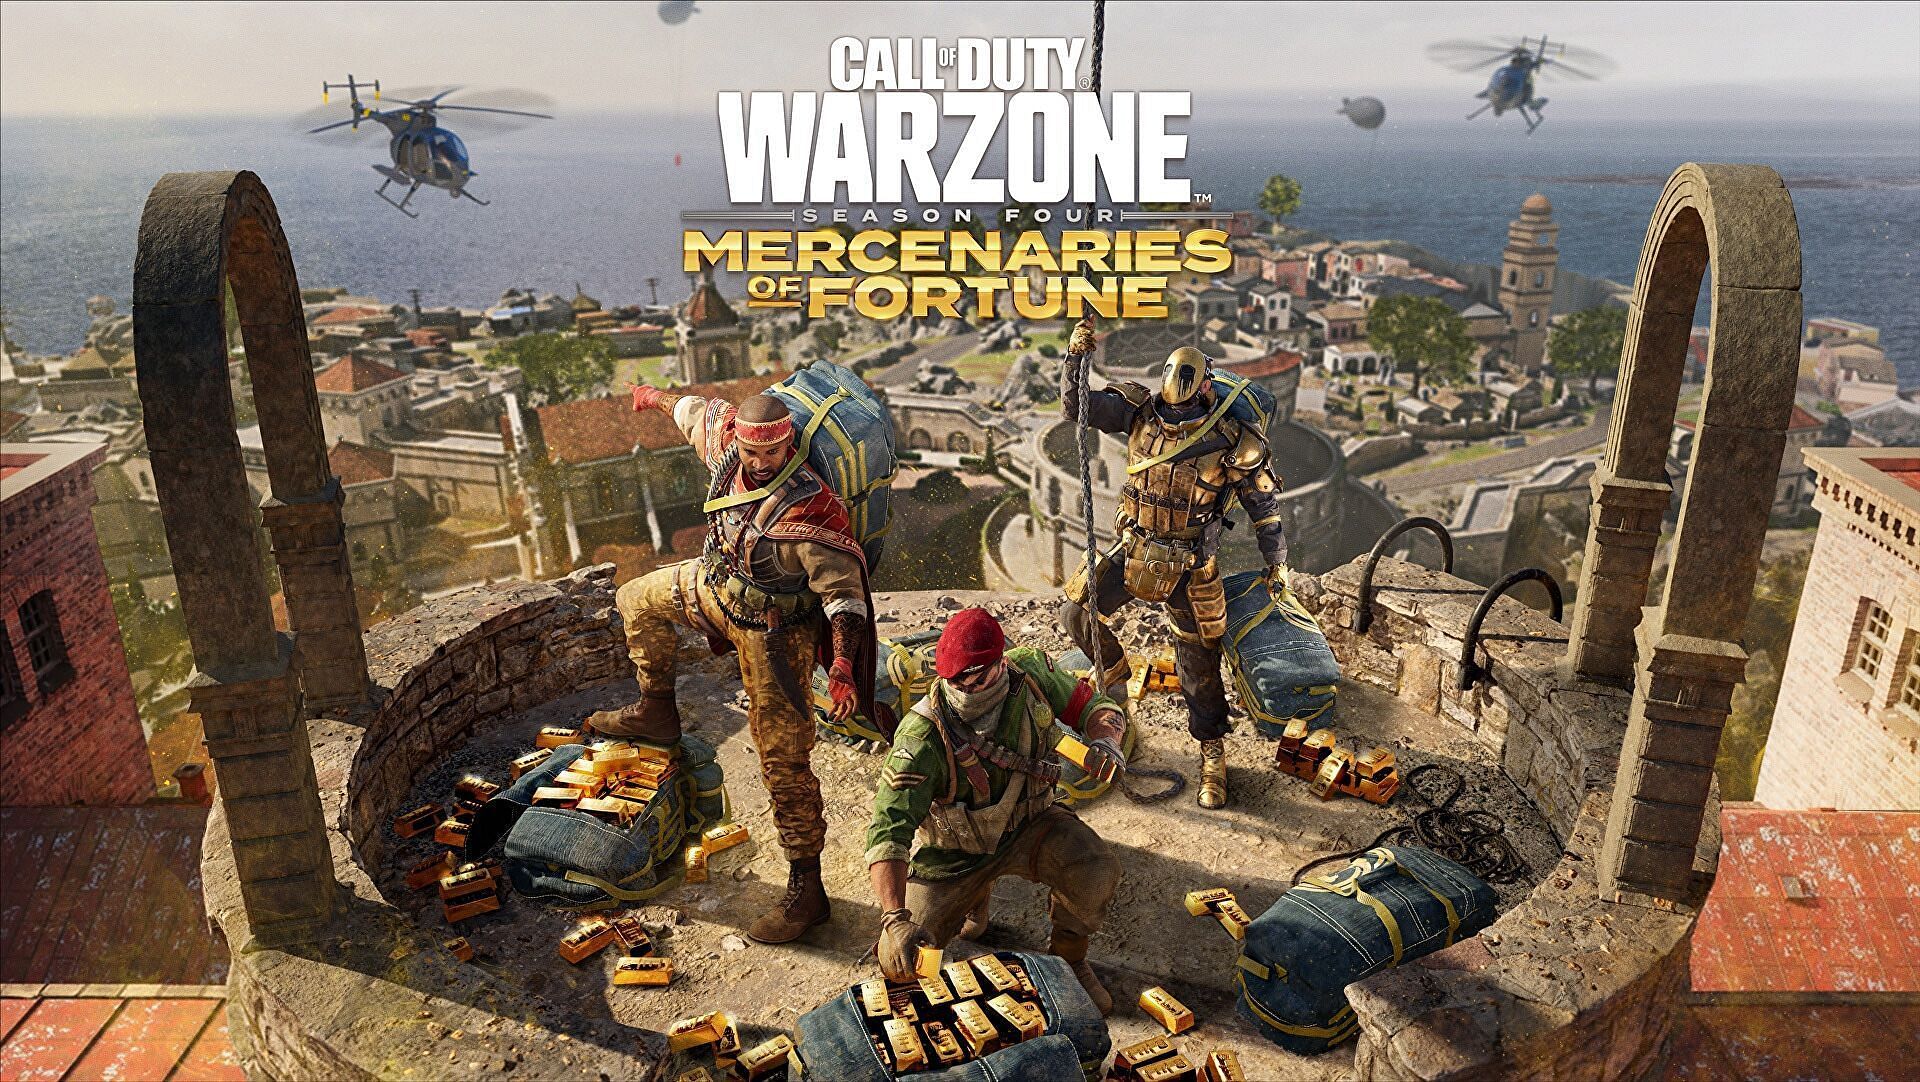 Warzone Season 4 is live right now (image via Activision)